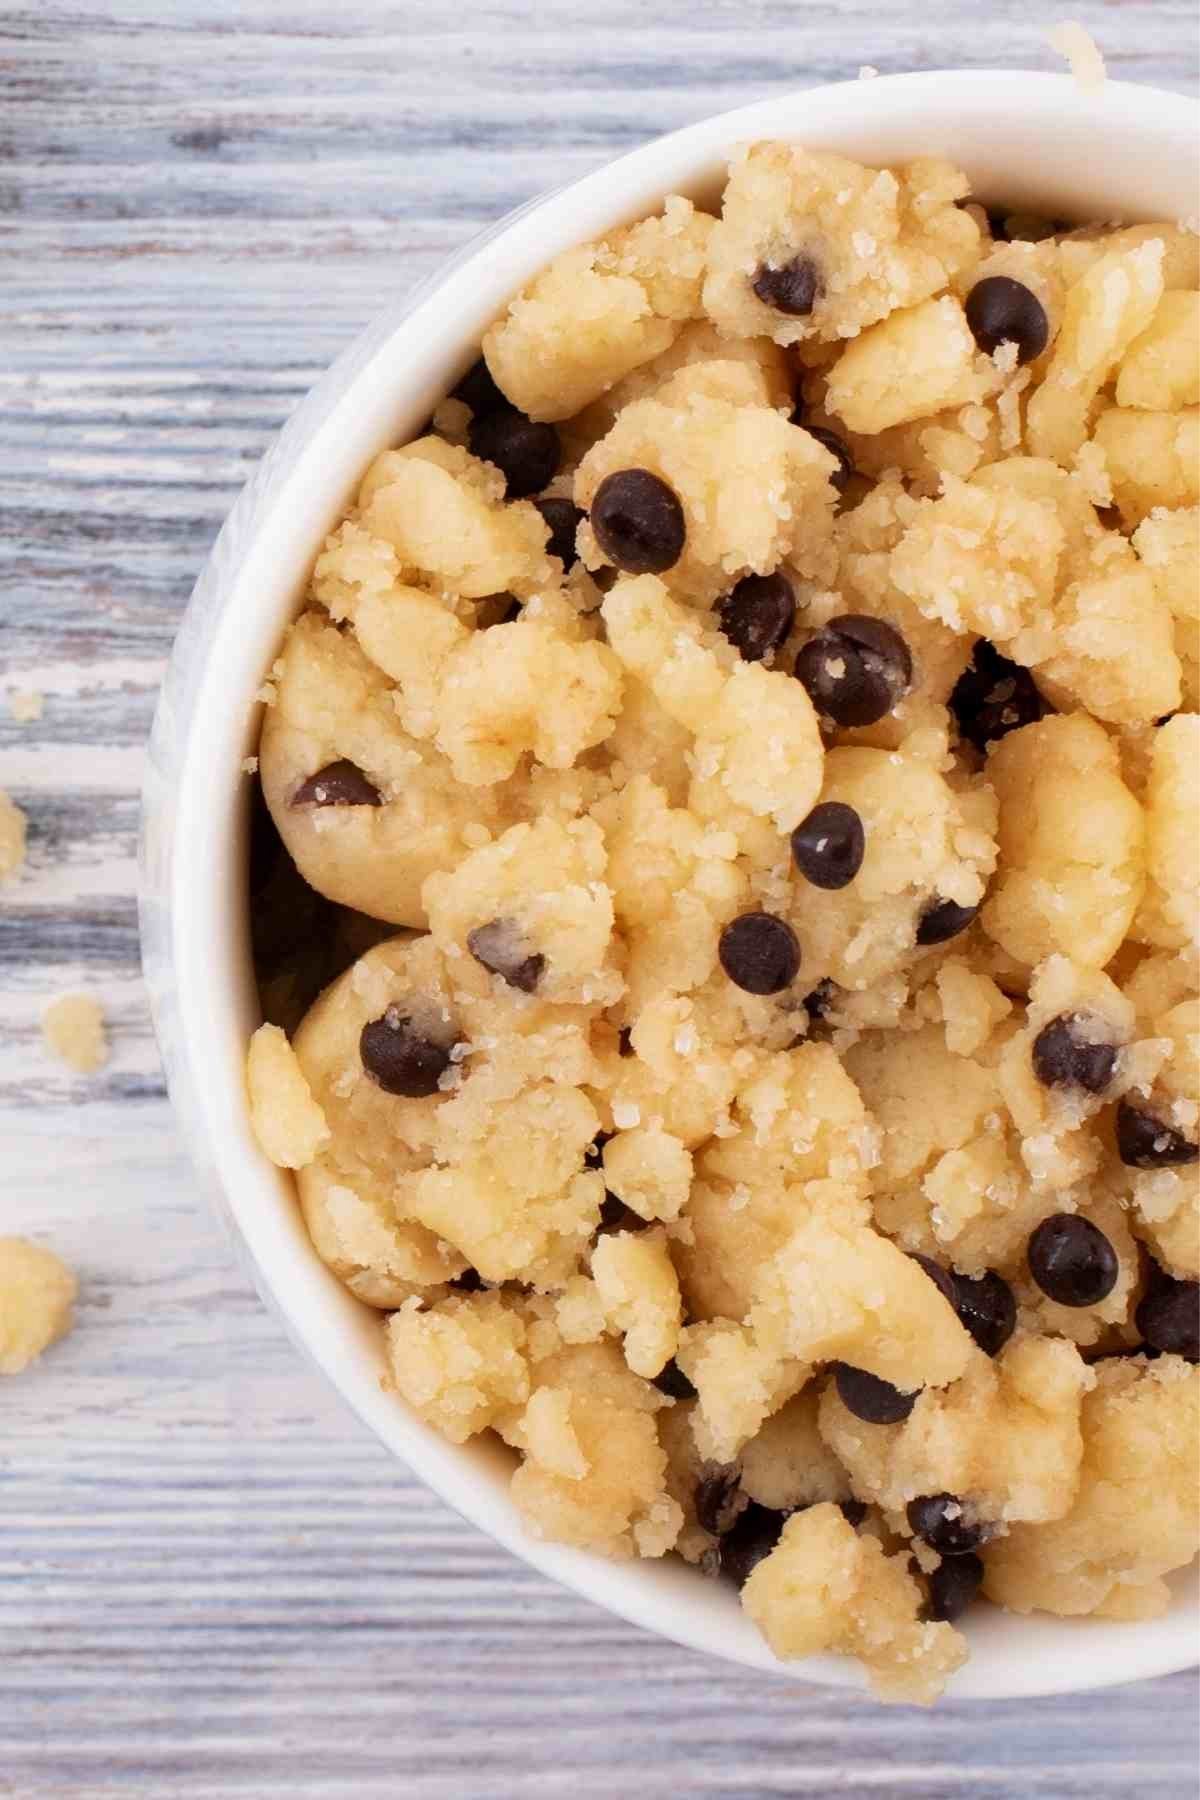 Edible Cookie Dough for One is an eggless single-serving dessert that takes minutes to make. It’s a nostalgic and perfect treat made with heat-treated flour and no eggs.